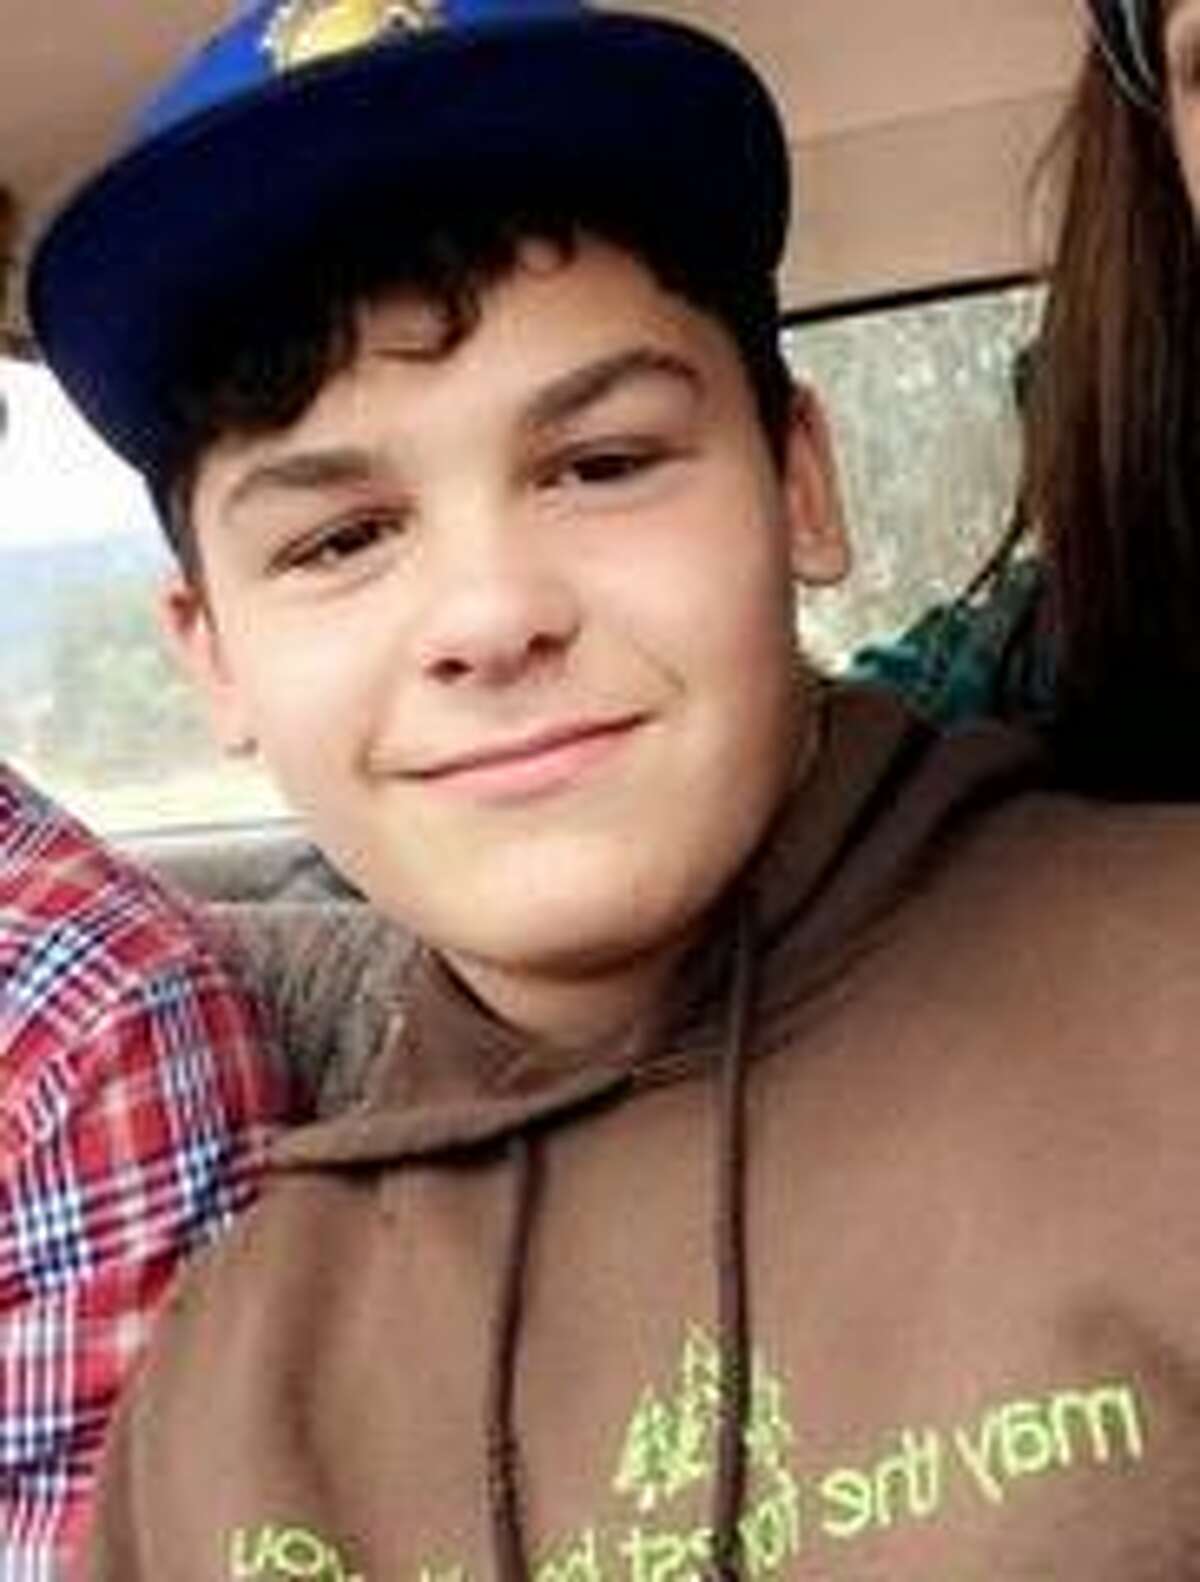 Santa Rosa teenager Lucas Coleman, 13, was missing Tuesday after he said he wanted to go live among the homeless, police said.